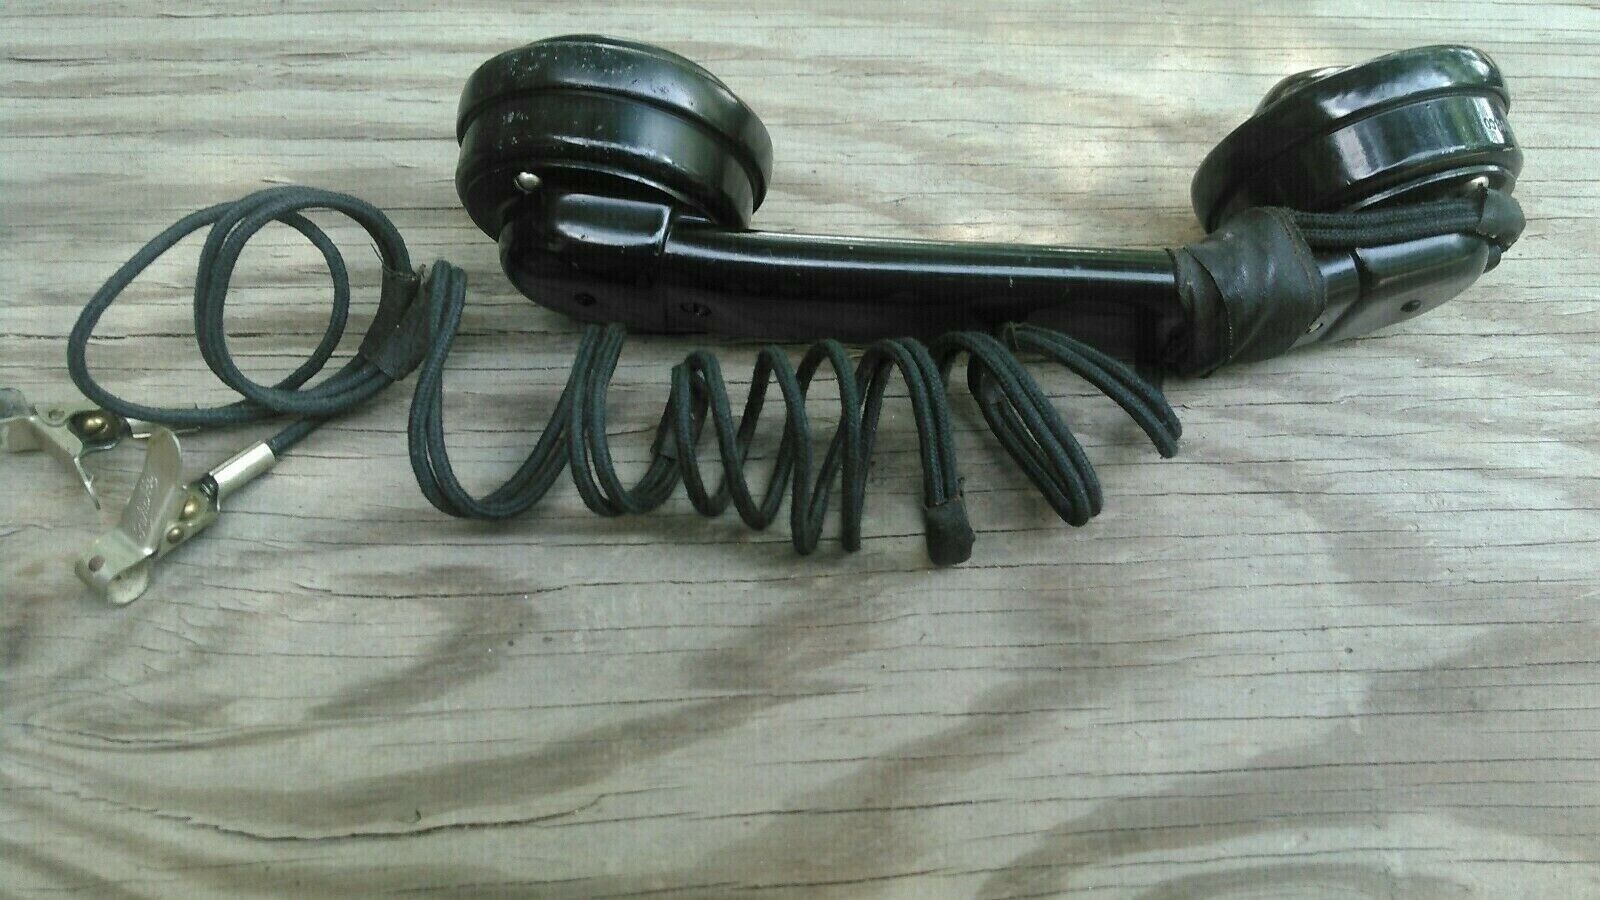 Telephone VINTAGE 1903 PROPERTY OF AMERICAN TELEPHONE AND TELEGRAPH CO HANDSET